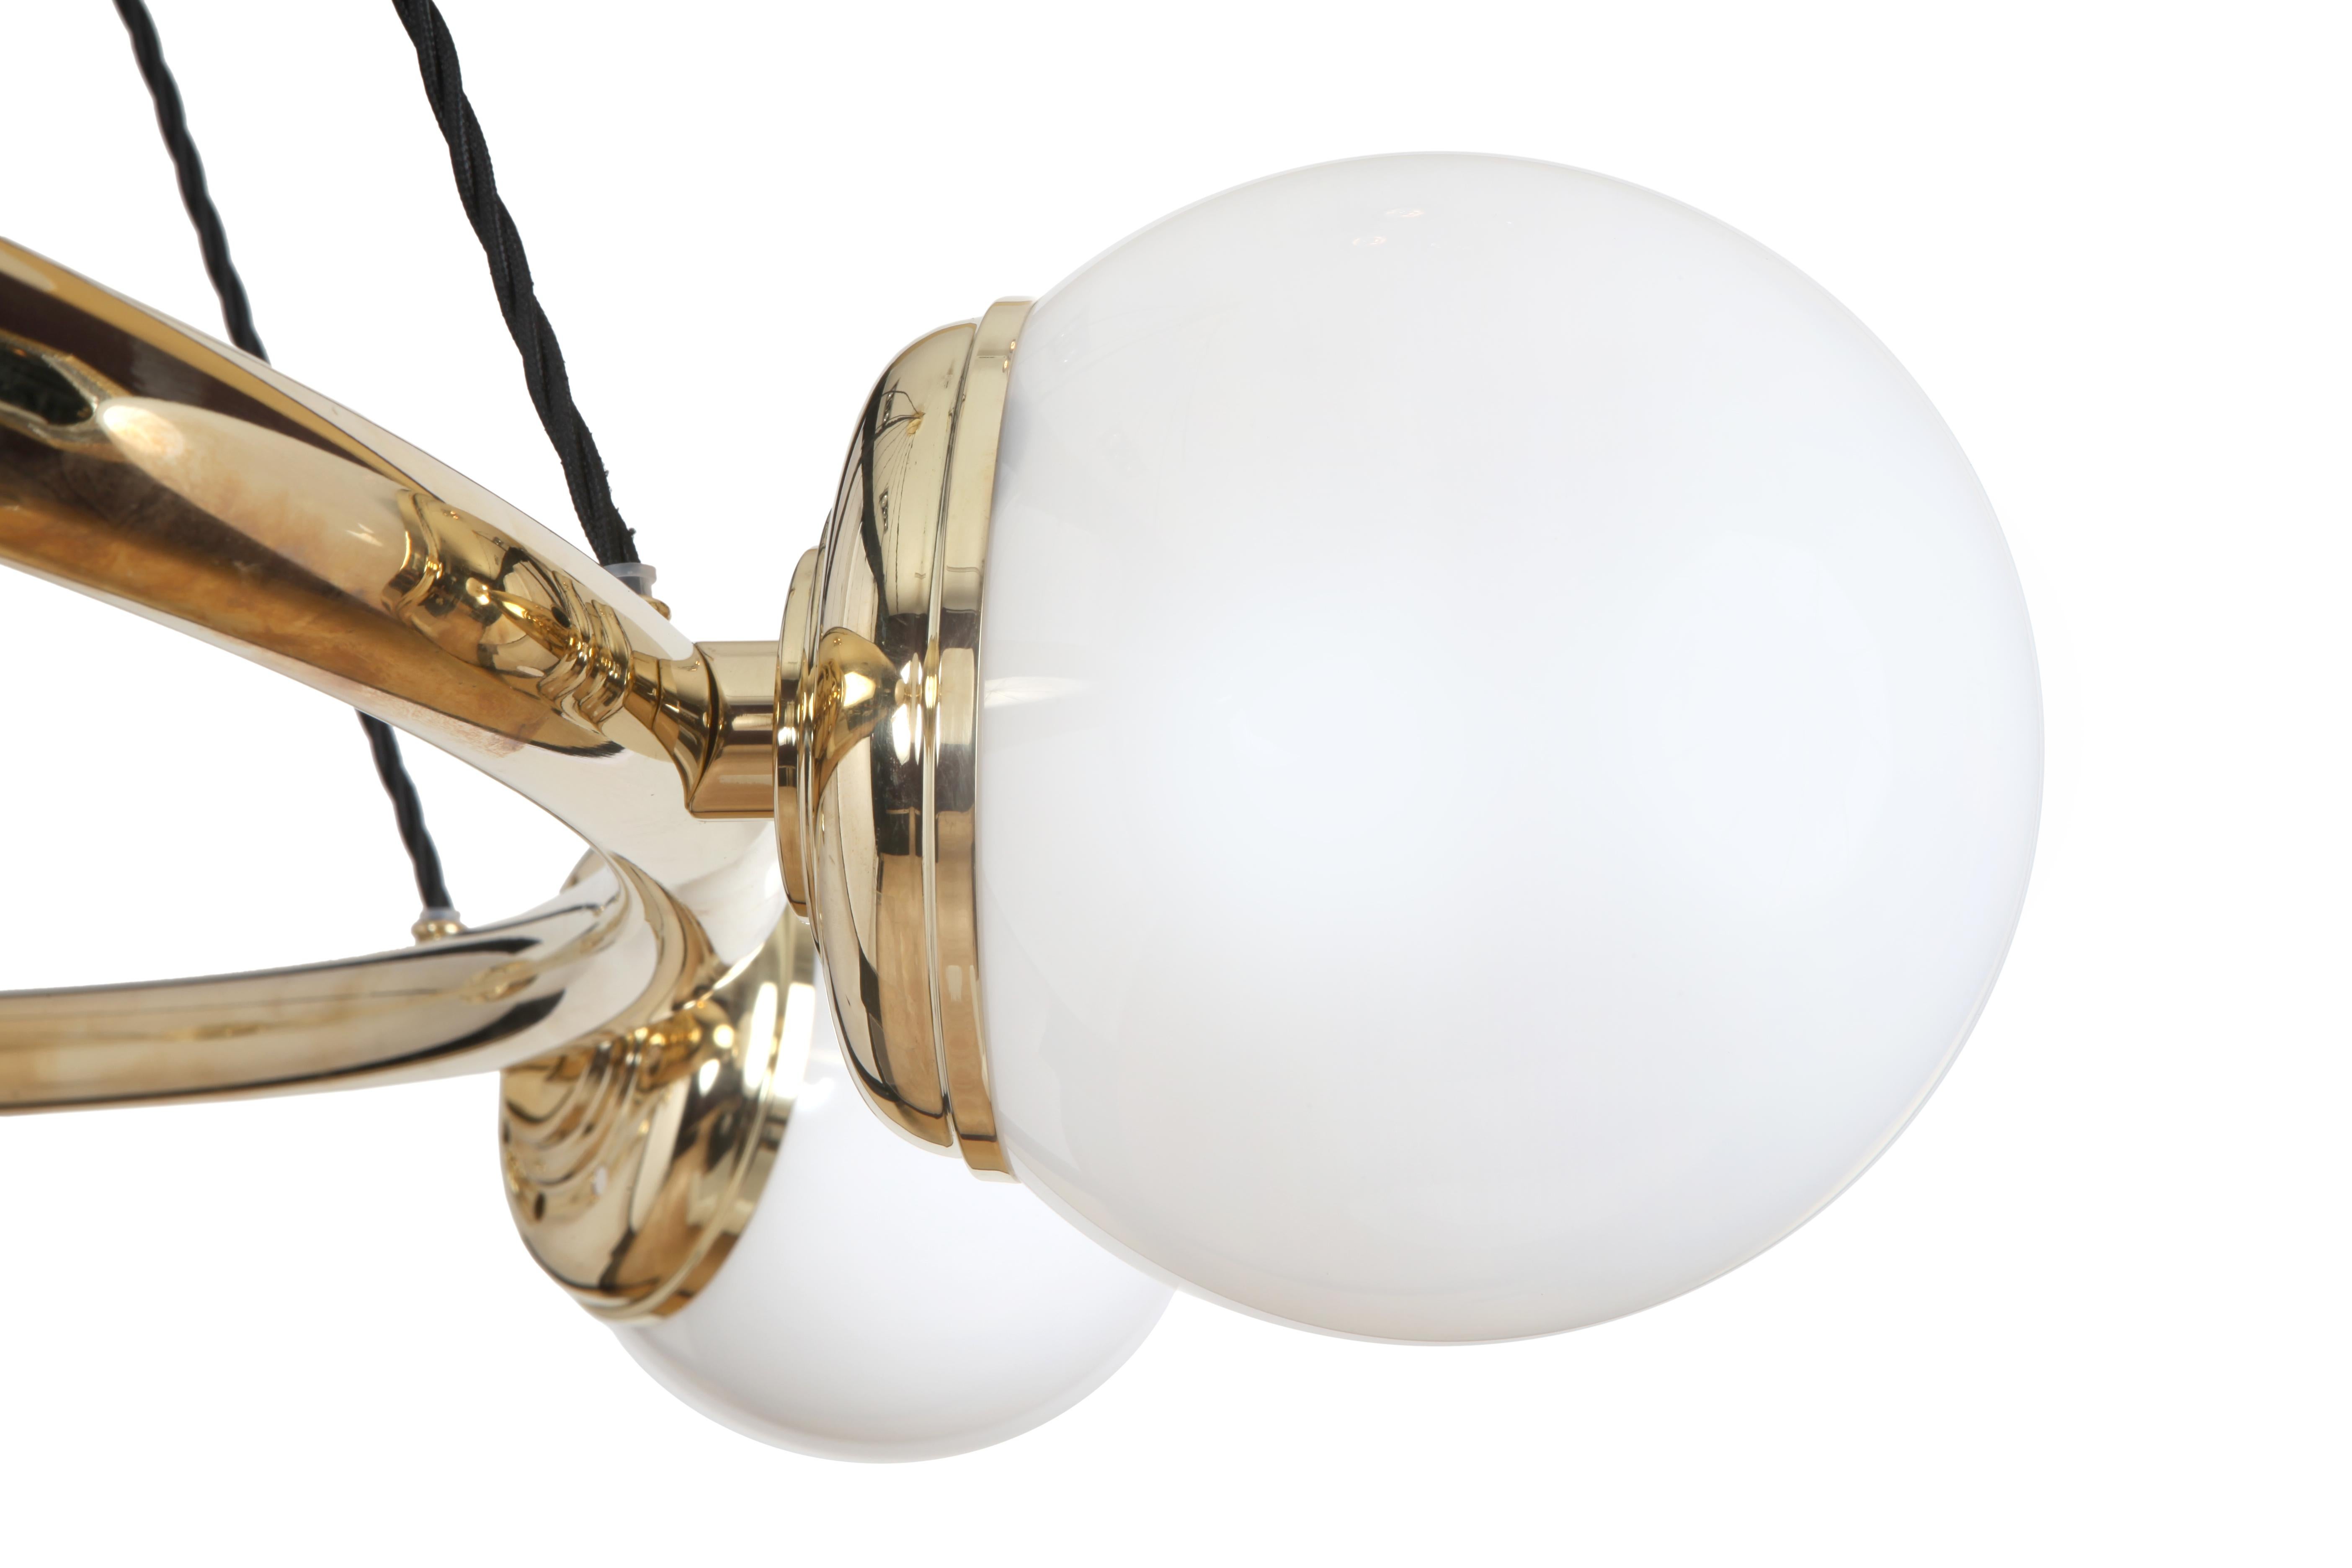 Italian Anello Pendant, Midcentury Style Brass Pendant with Opal Glass Shades (US Spec)